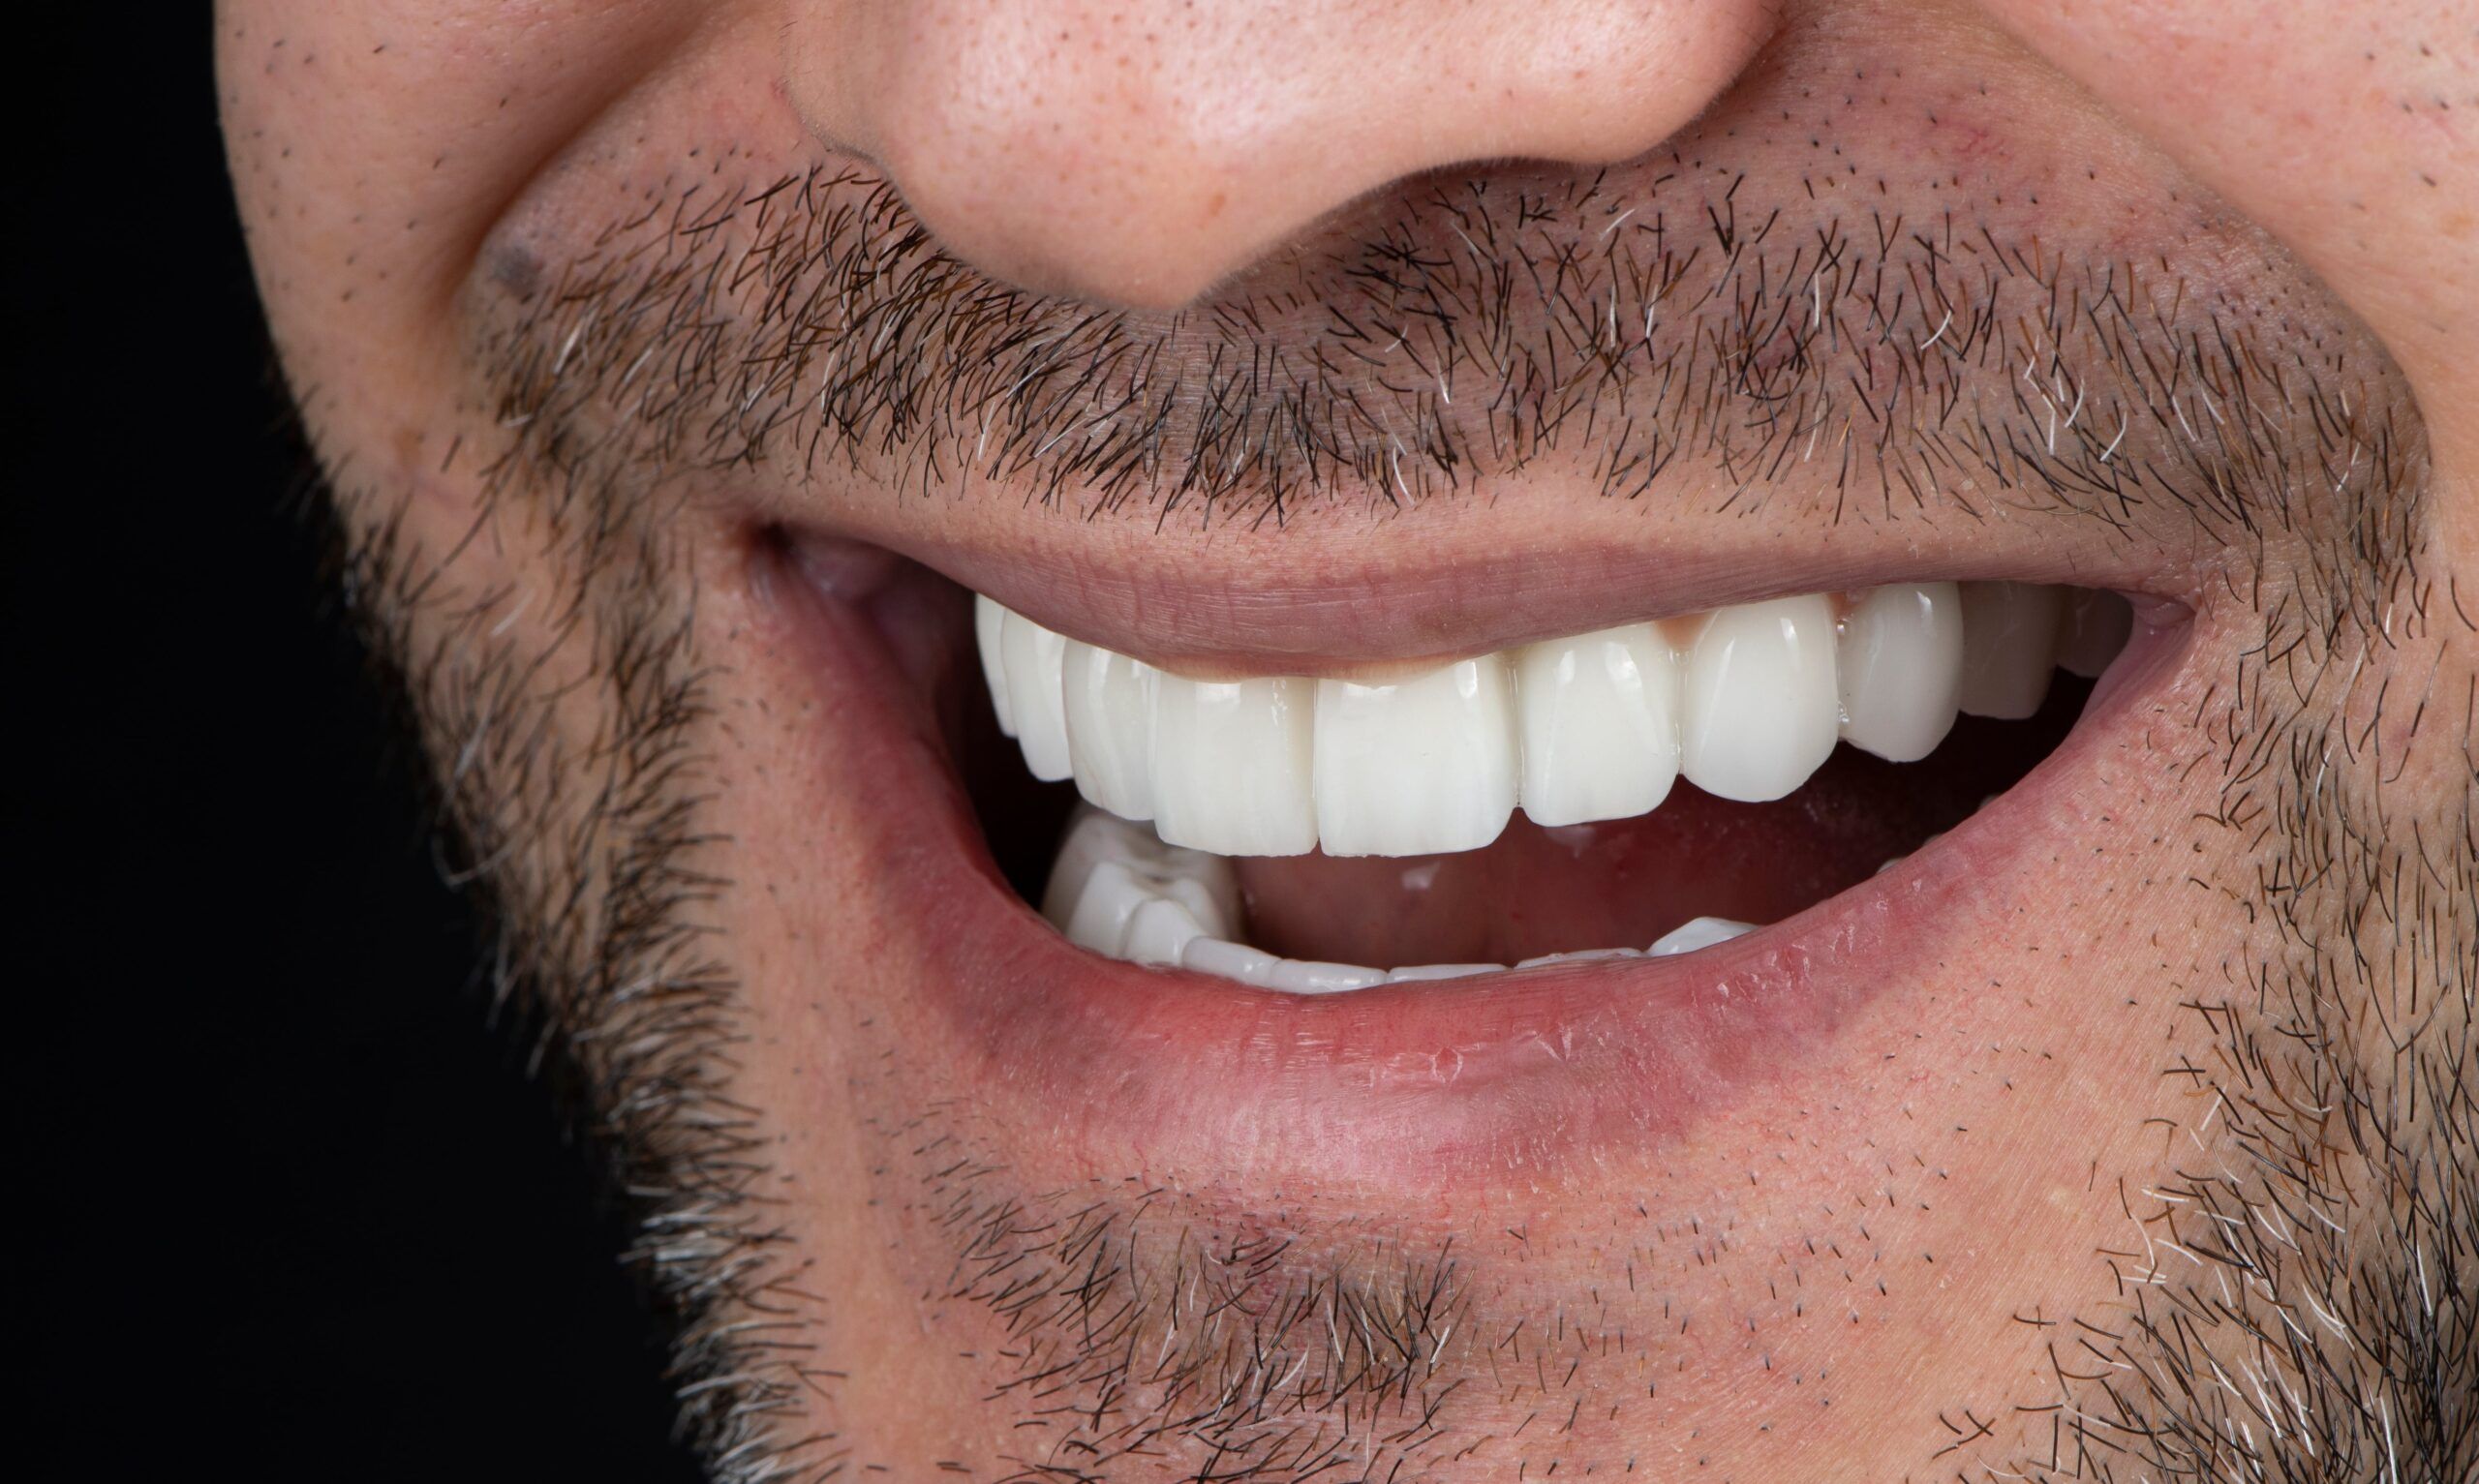 man smiling with perfect teeth